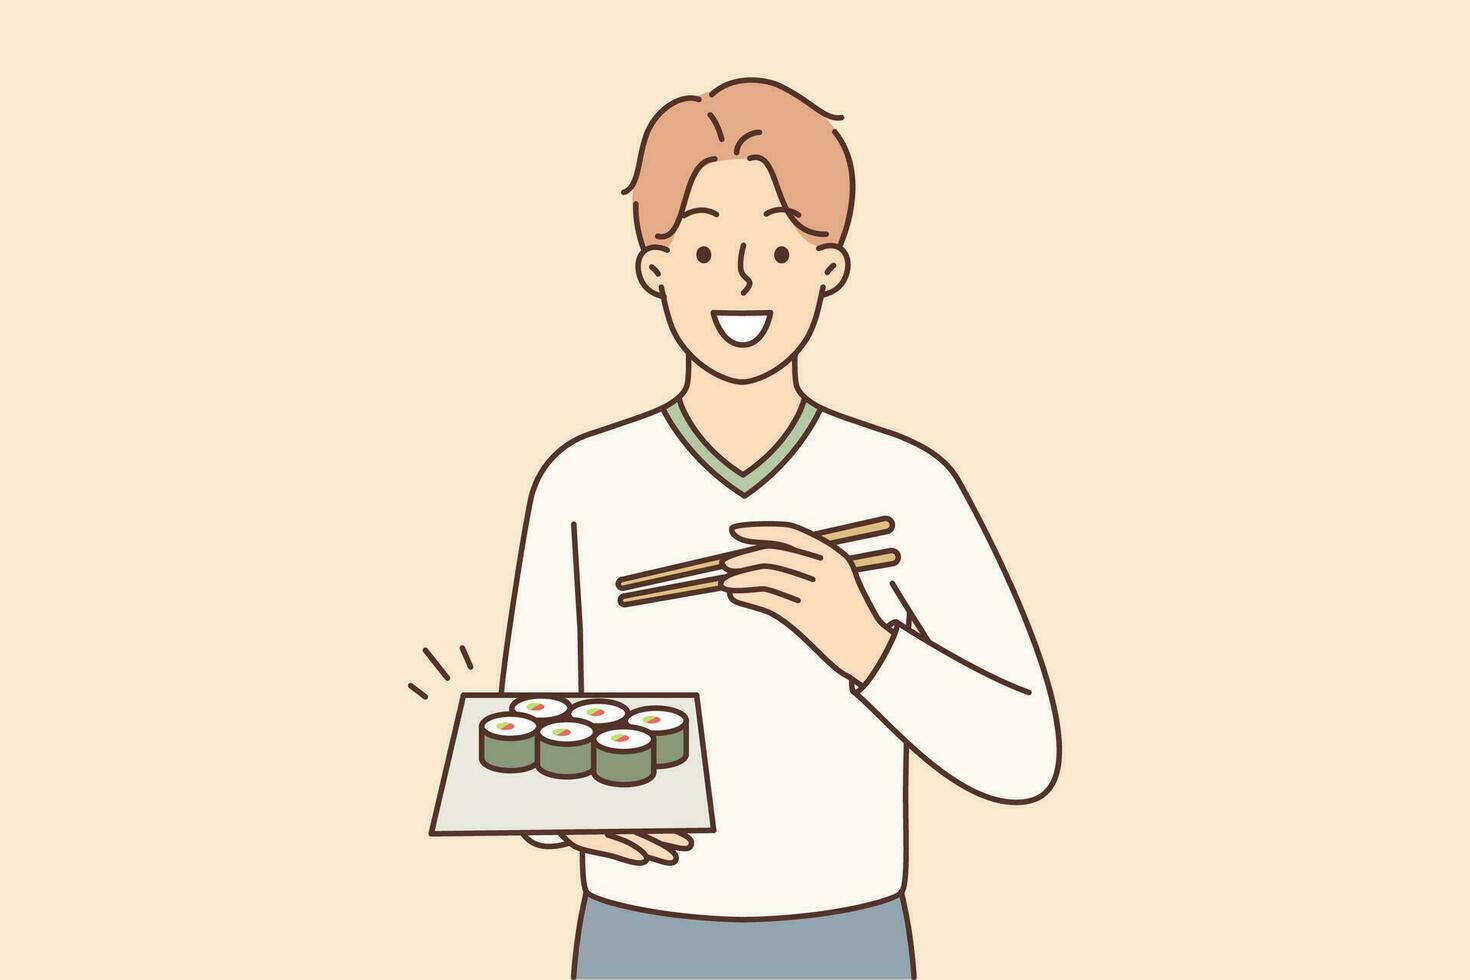 Man holding plate of maki rolls invites to dine in japanese restaurant with delicious healthy food. Guy uses chopsticks eating sushi or rolls delivered from cafe with traditional asian menu vector